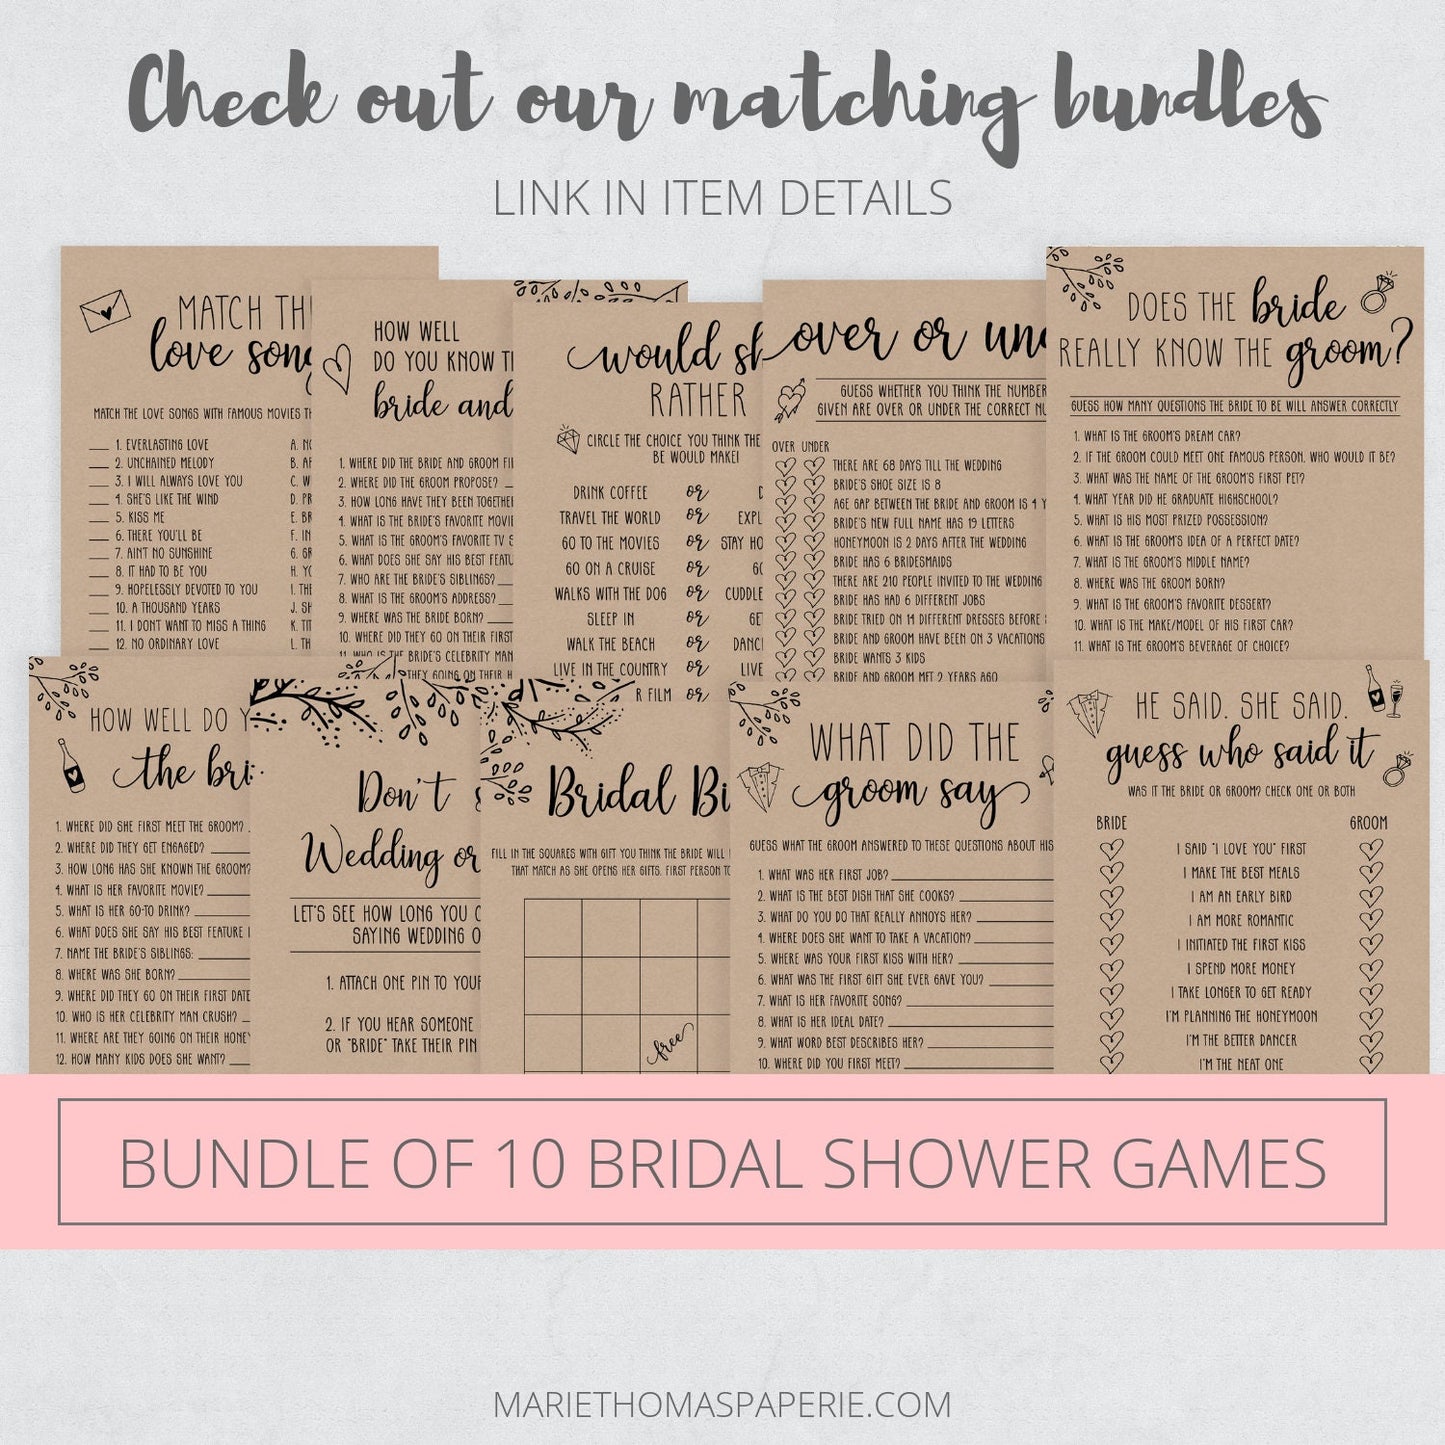 Editable Over or Under Game Bridal Shower Games Rustic Kraft Paper & Black and White Template